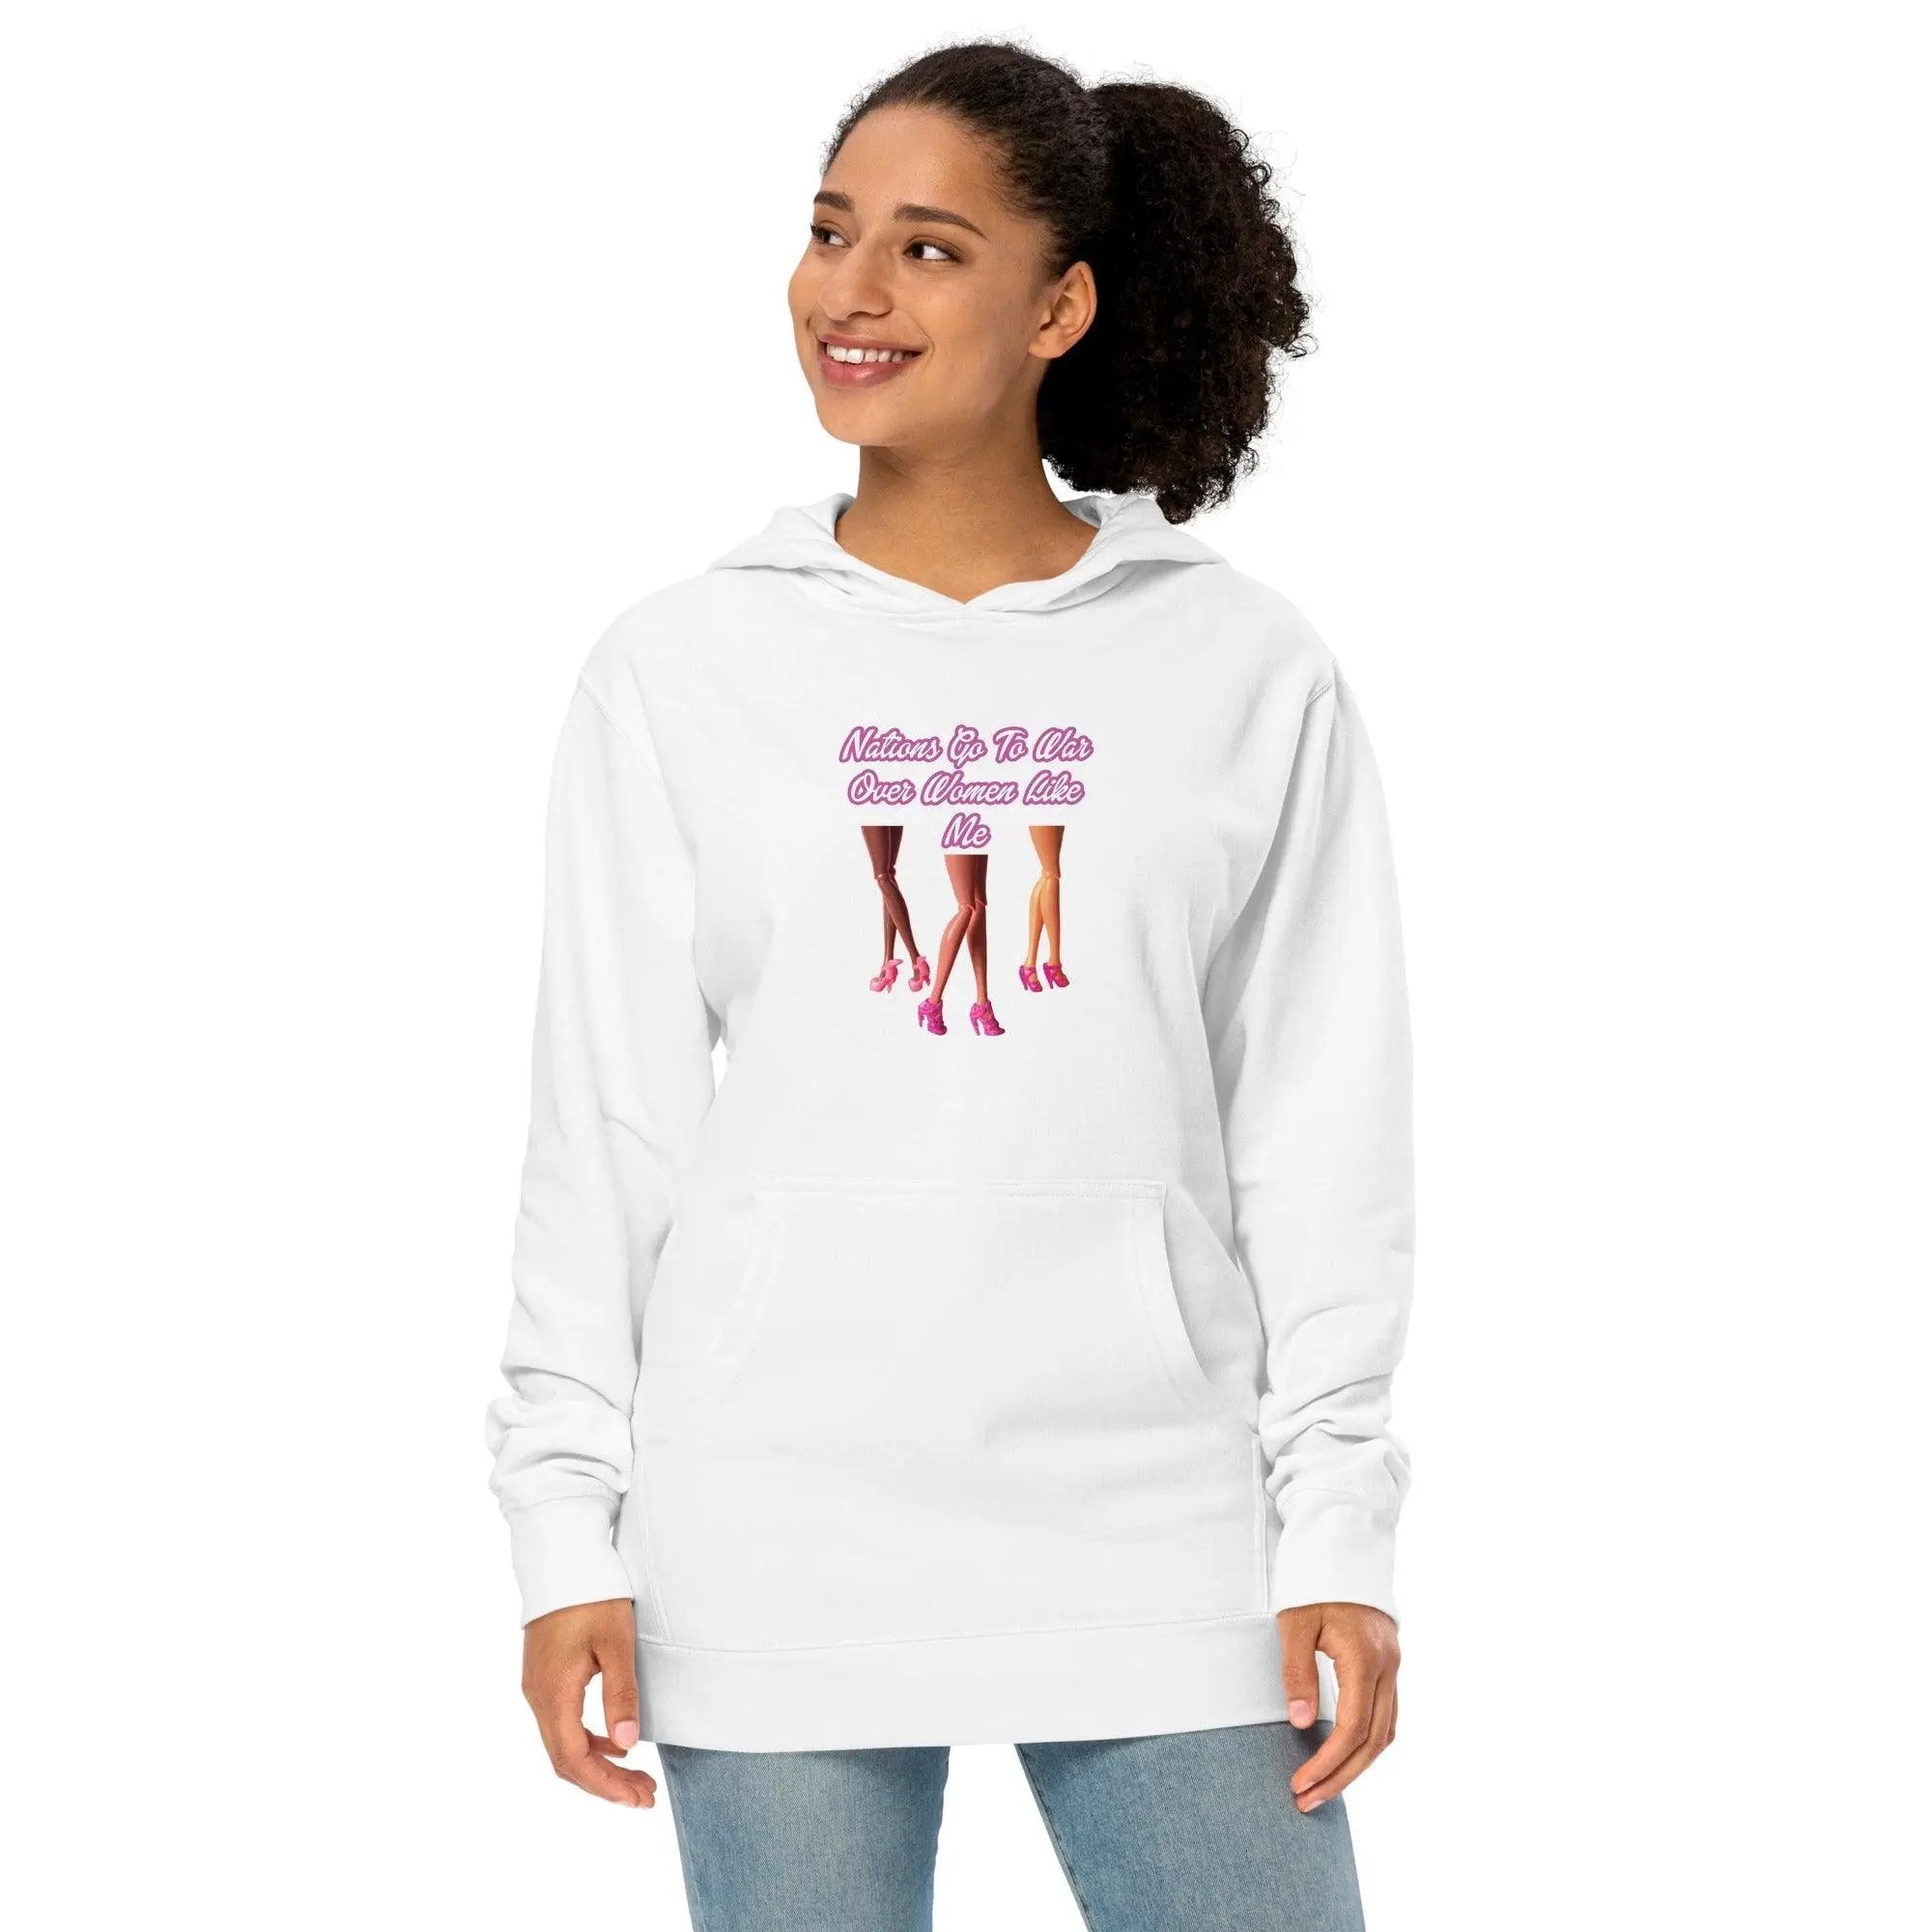 Nations Go To War Over Women Like Me Unisex midweight hoodie